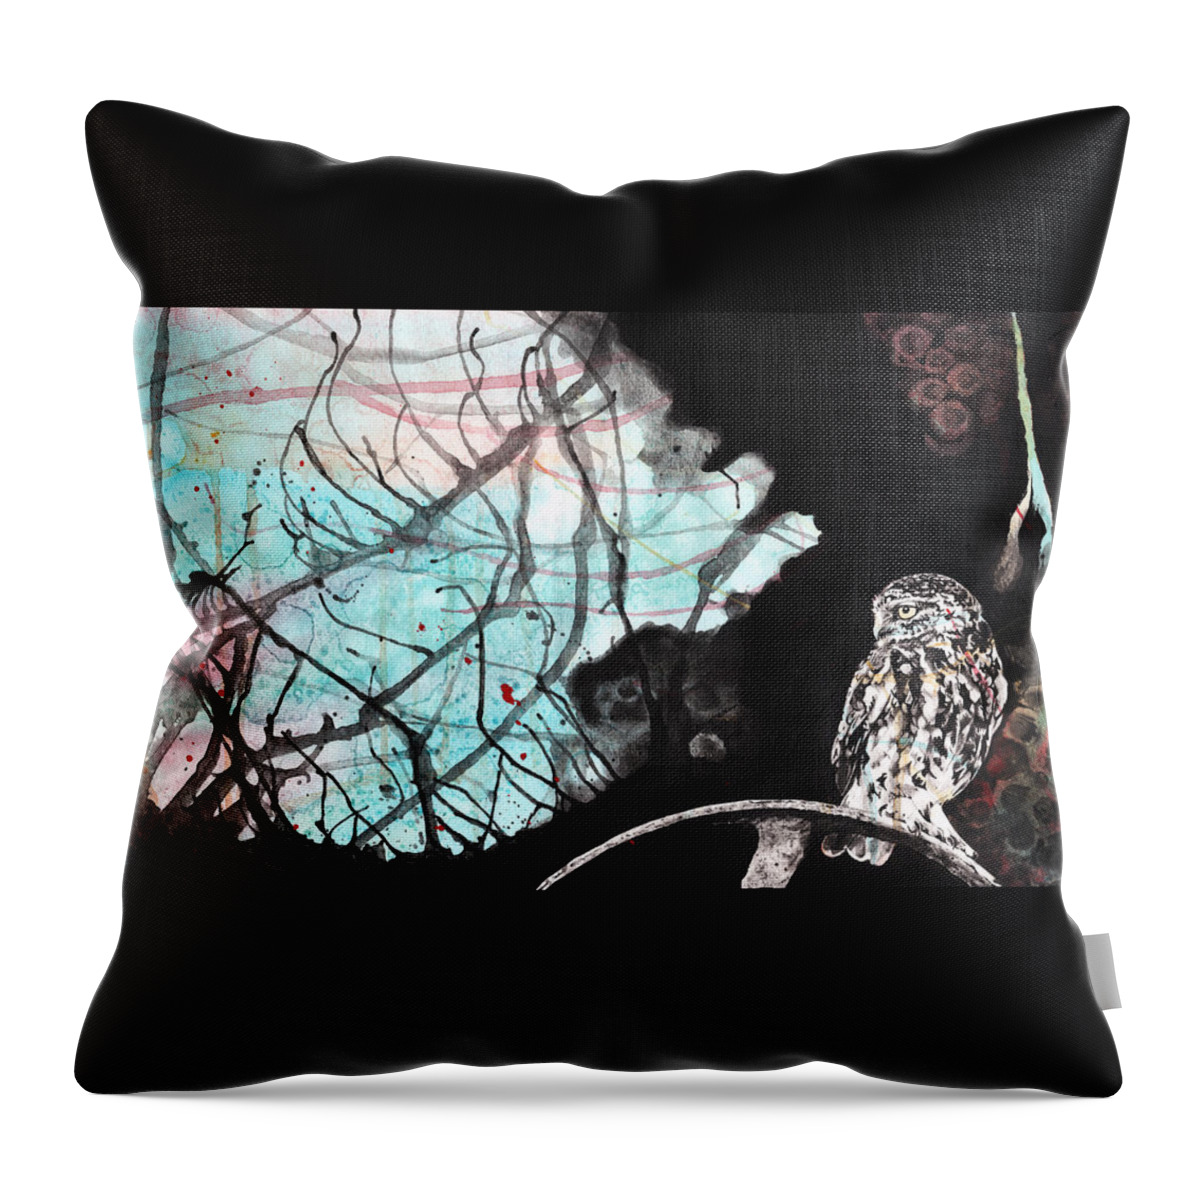 Goth Throw Pillow featuring the painting Duplicity by Tiffany DiGiacomo